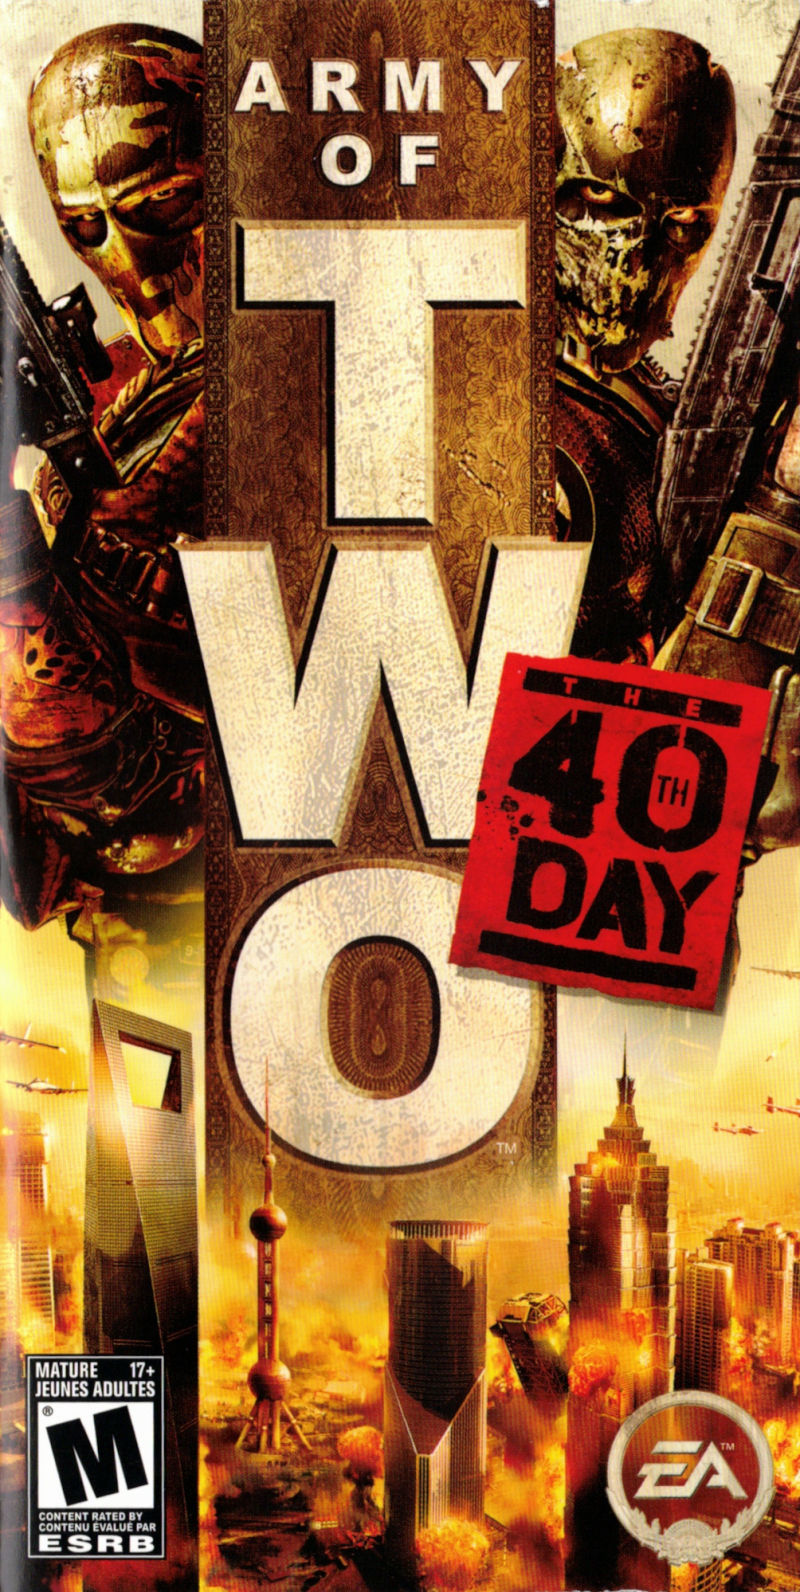 ARMY OF TWO: 40 DAY PSP